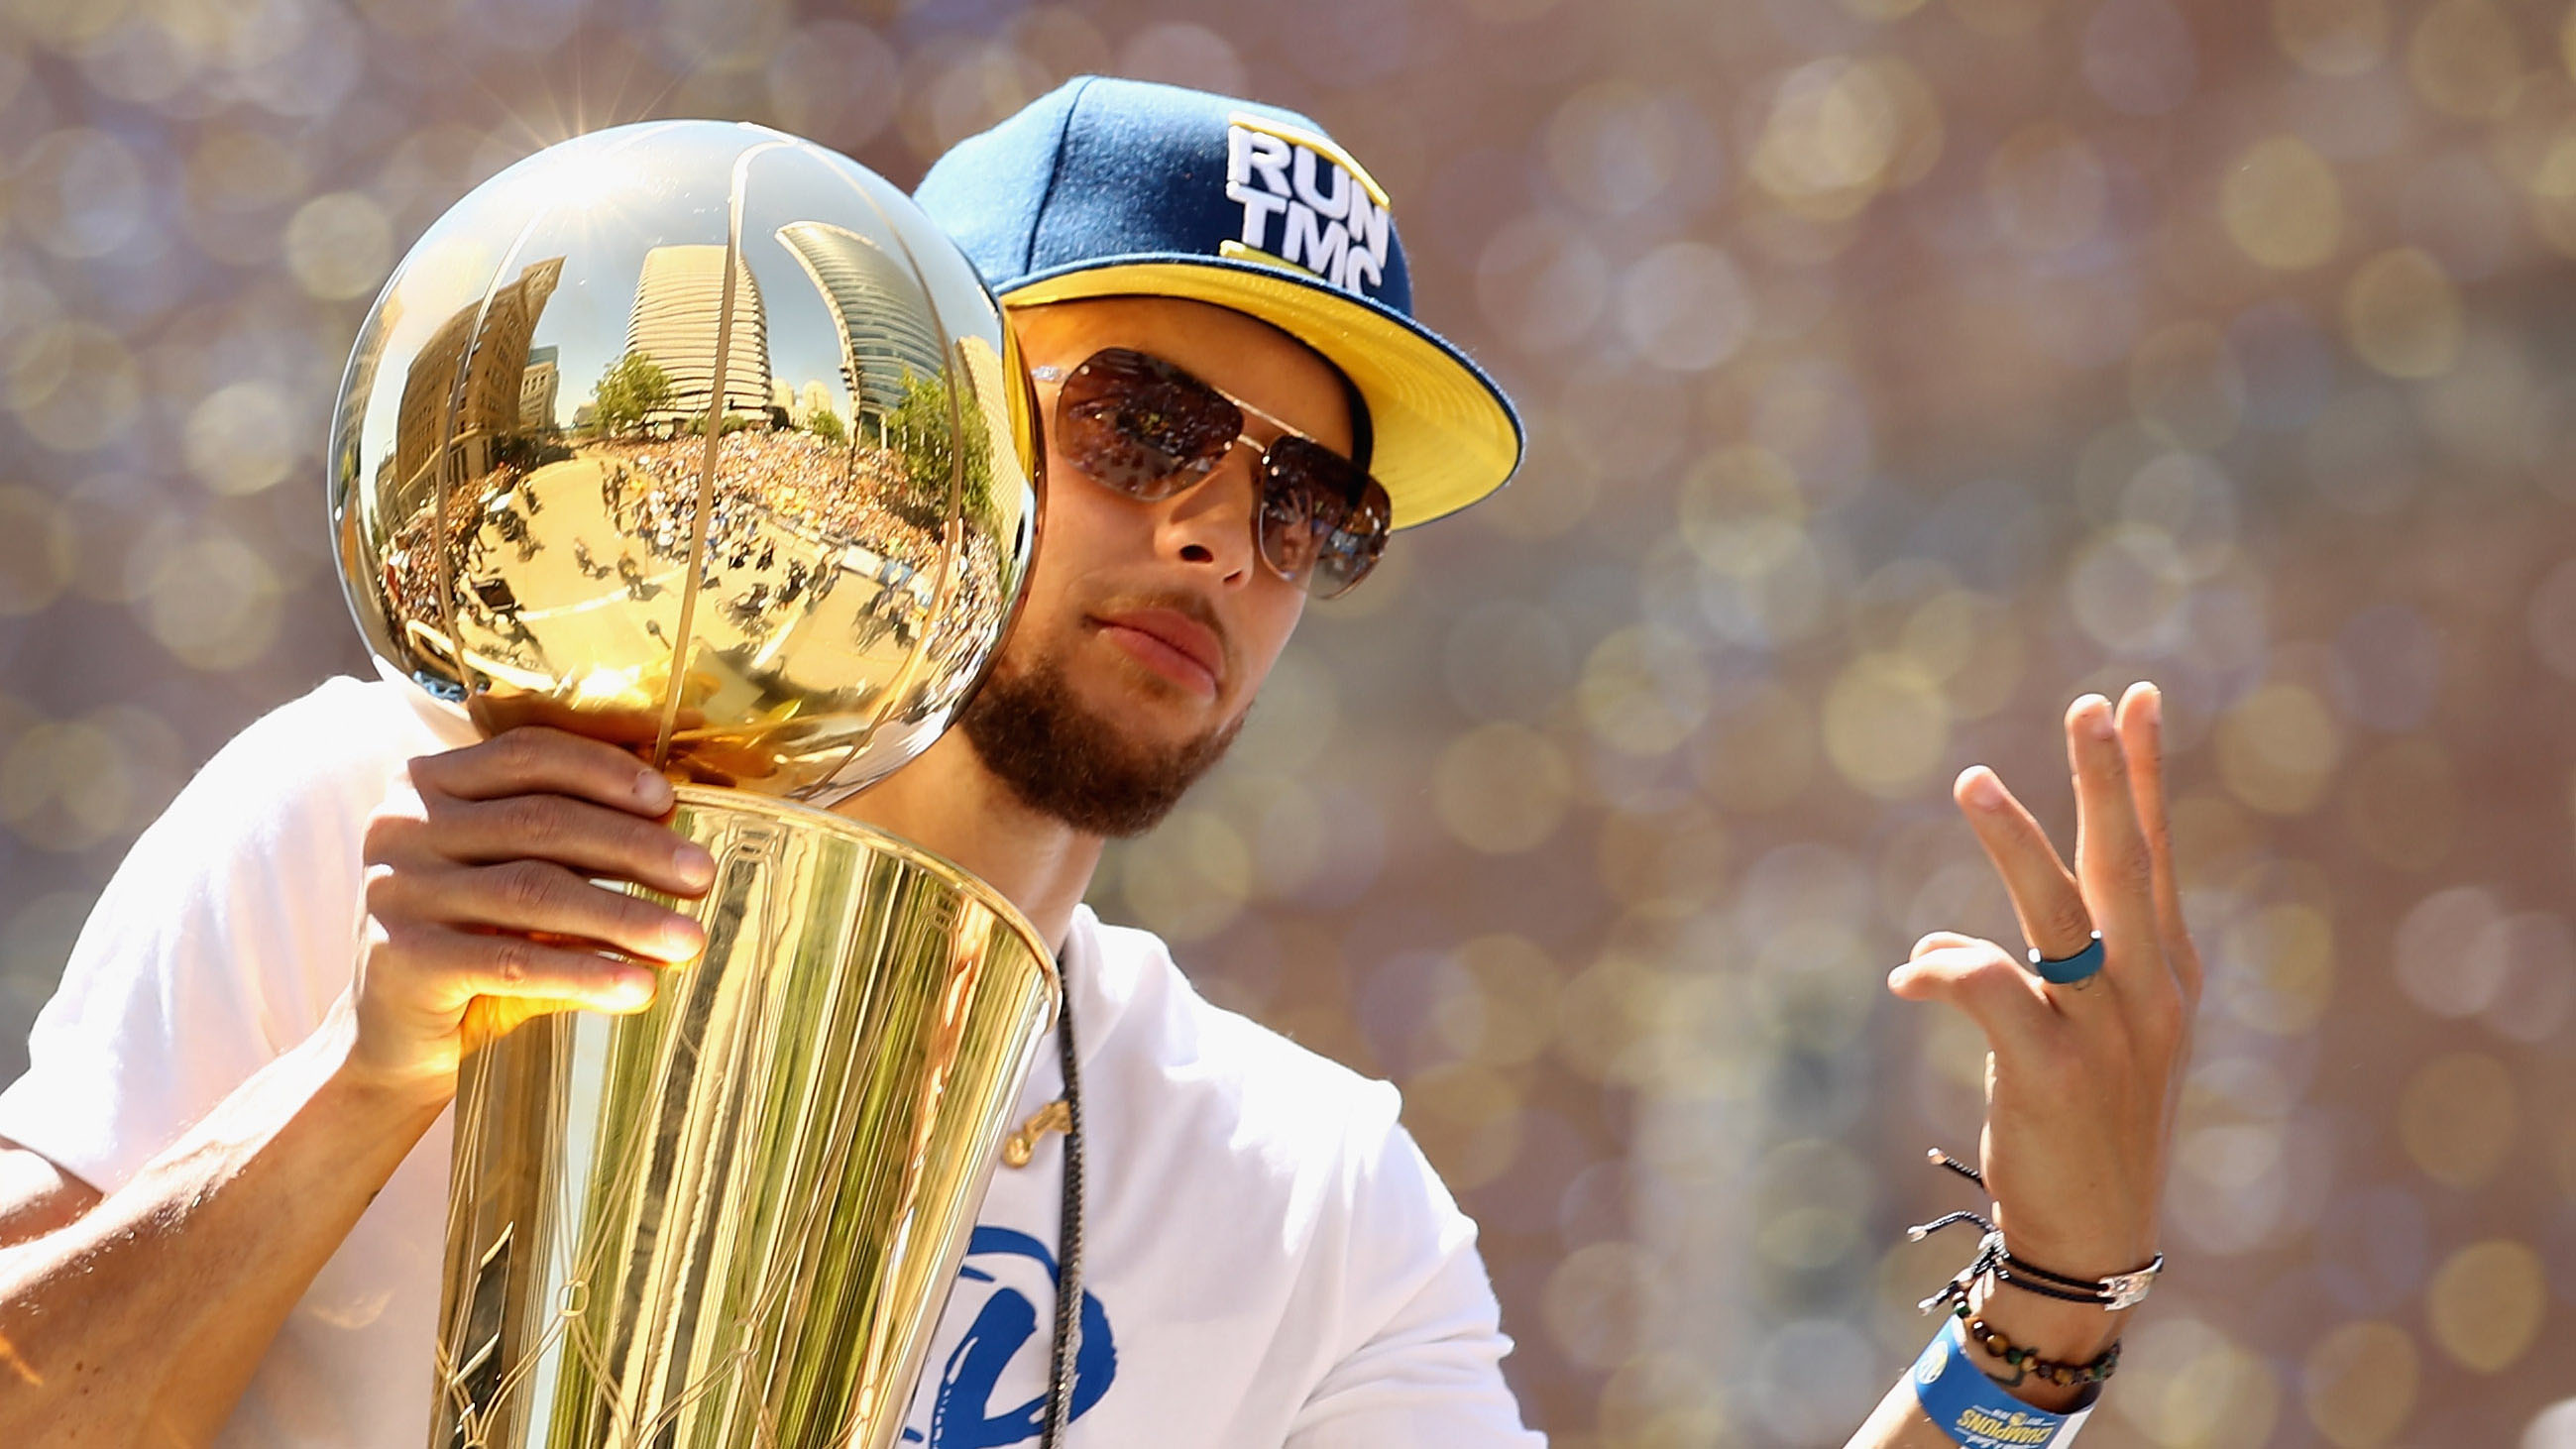 Goat Wearing Steph Curry Jersey at Warriors' Championship Parade